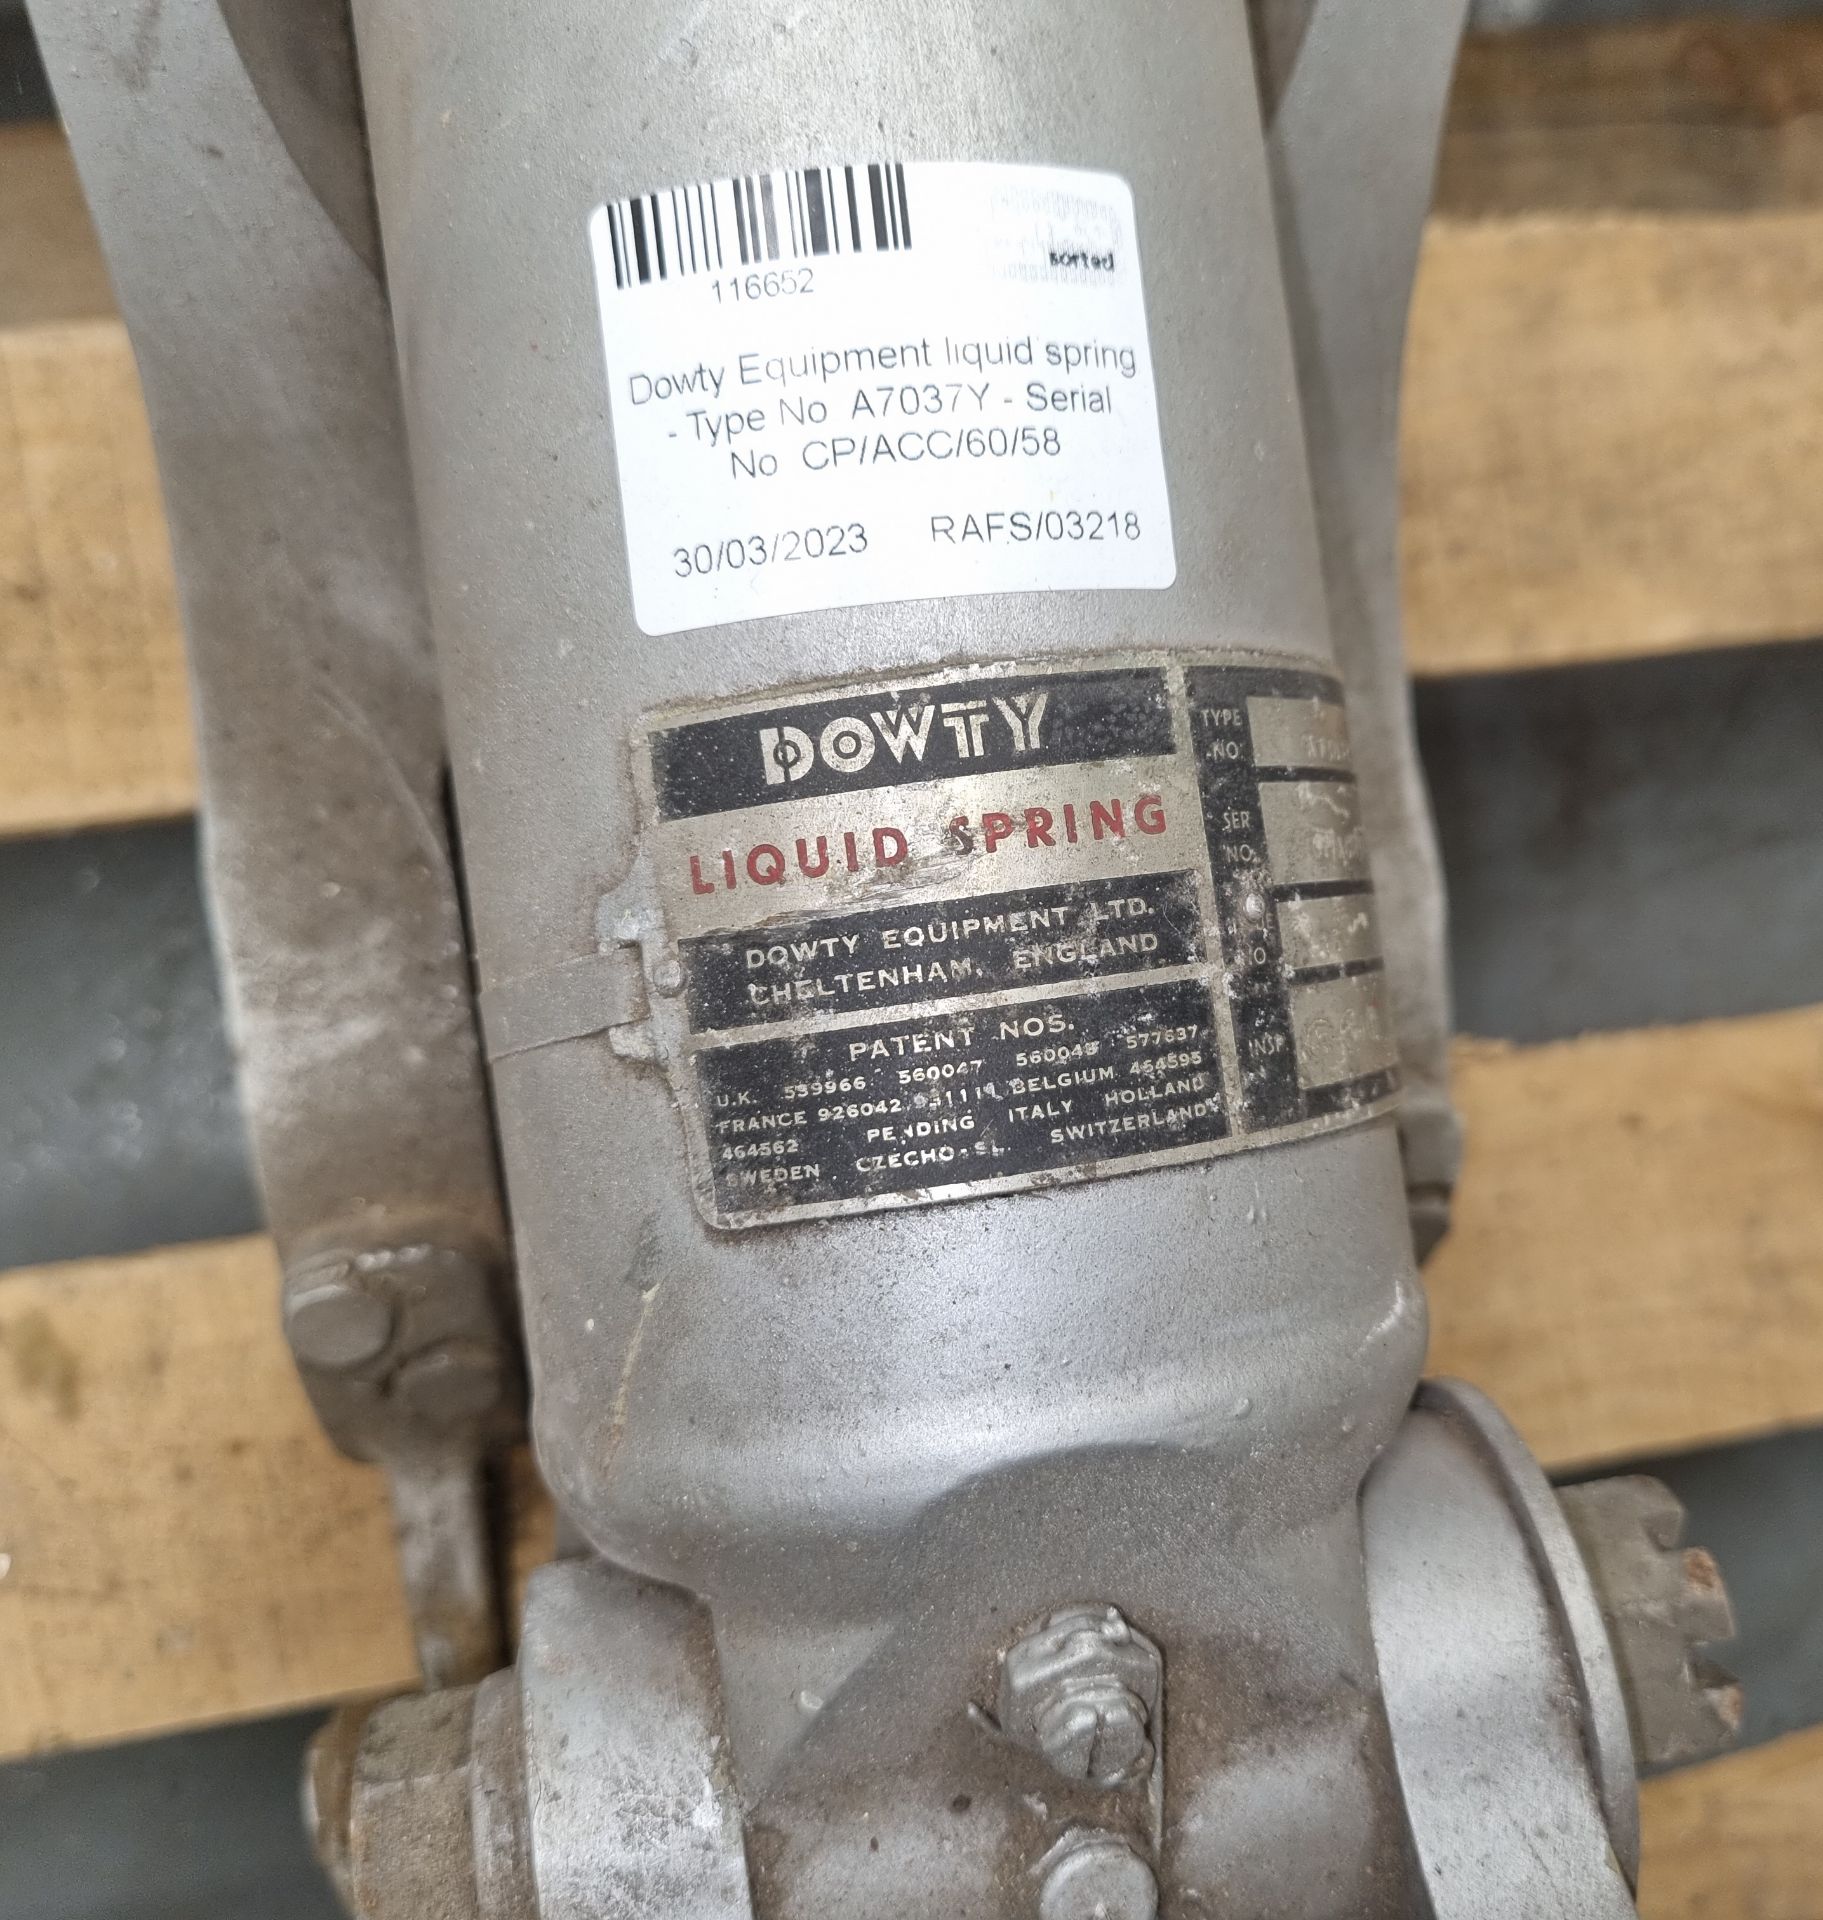 Dowty Equipment liquid spring - Type No. A7037Y - Serial No. CP/ACC/60/58 - Image 6 of 11